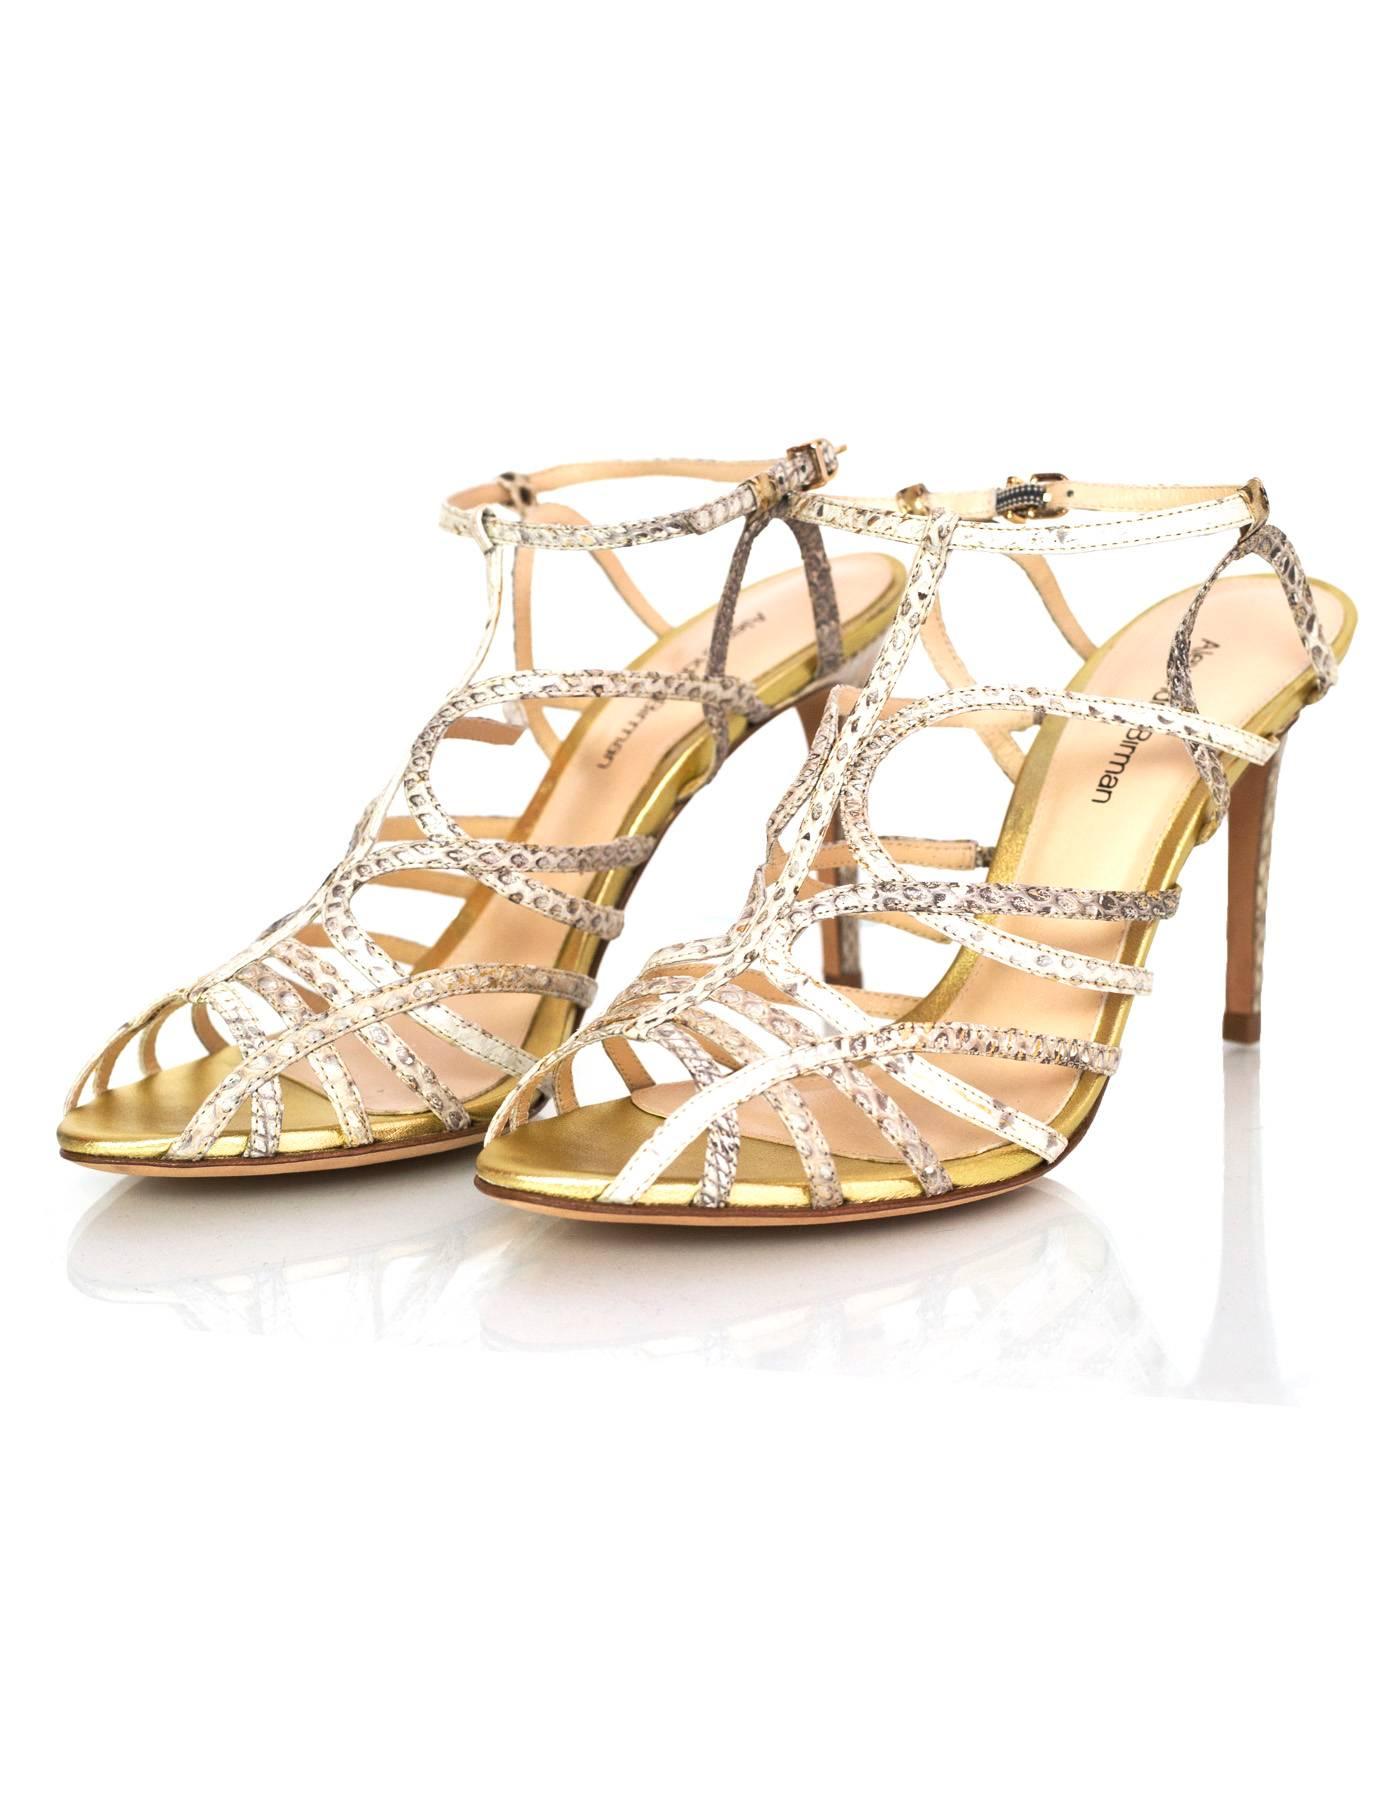 Alexandre Birman Gold and Beige Caged Sandals Sz 38

Made In: Brazil
Color: Beige, gold
Materials: Snakeskin
Sole Stamp: Alexandre Birman 38
Closure/opening: Buckle closure at ankle
Overall Condition: Excellent pre-owned condition - no signs of